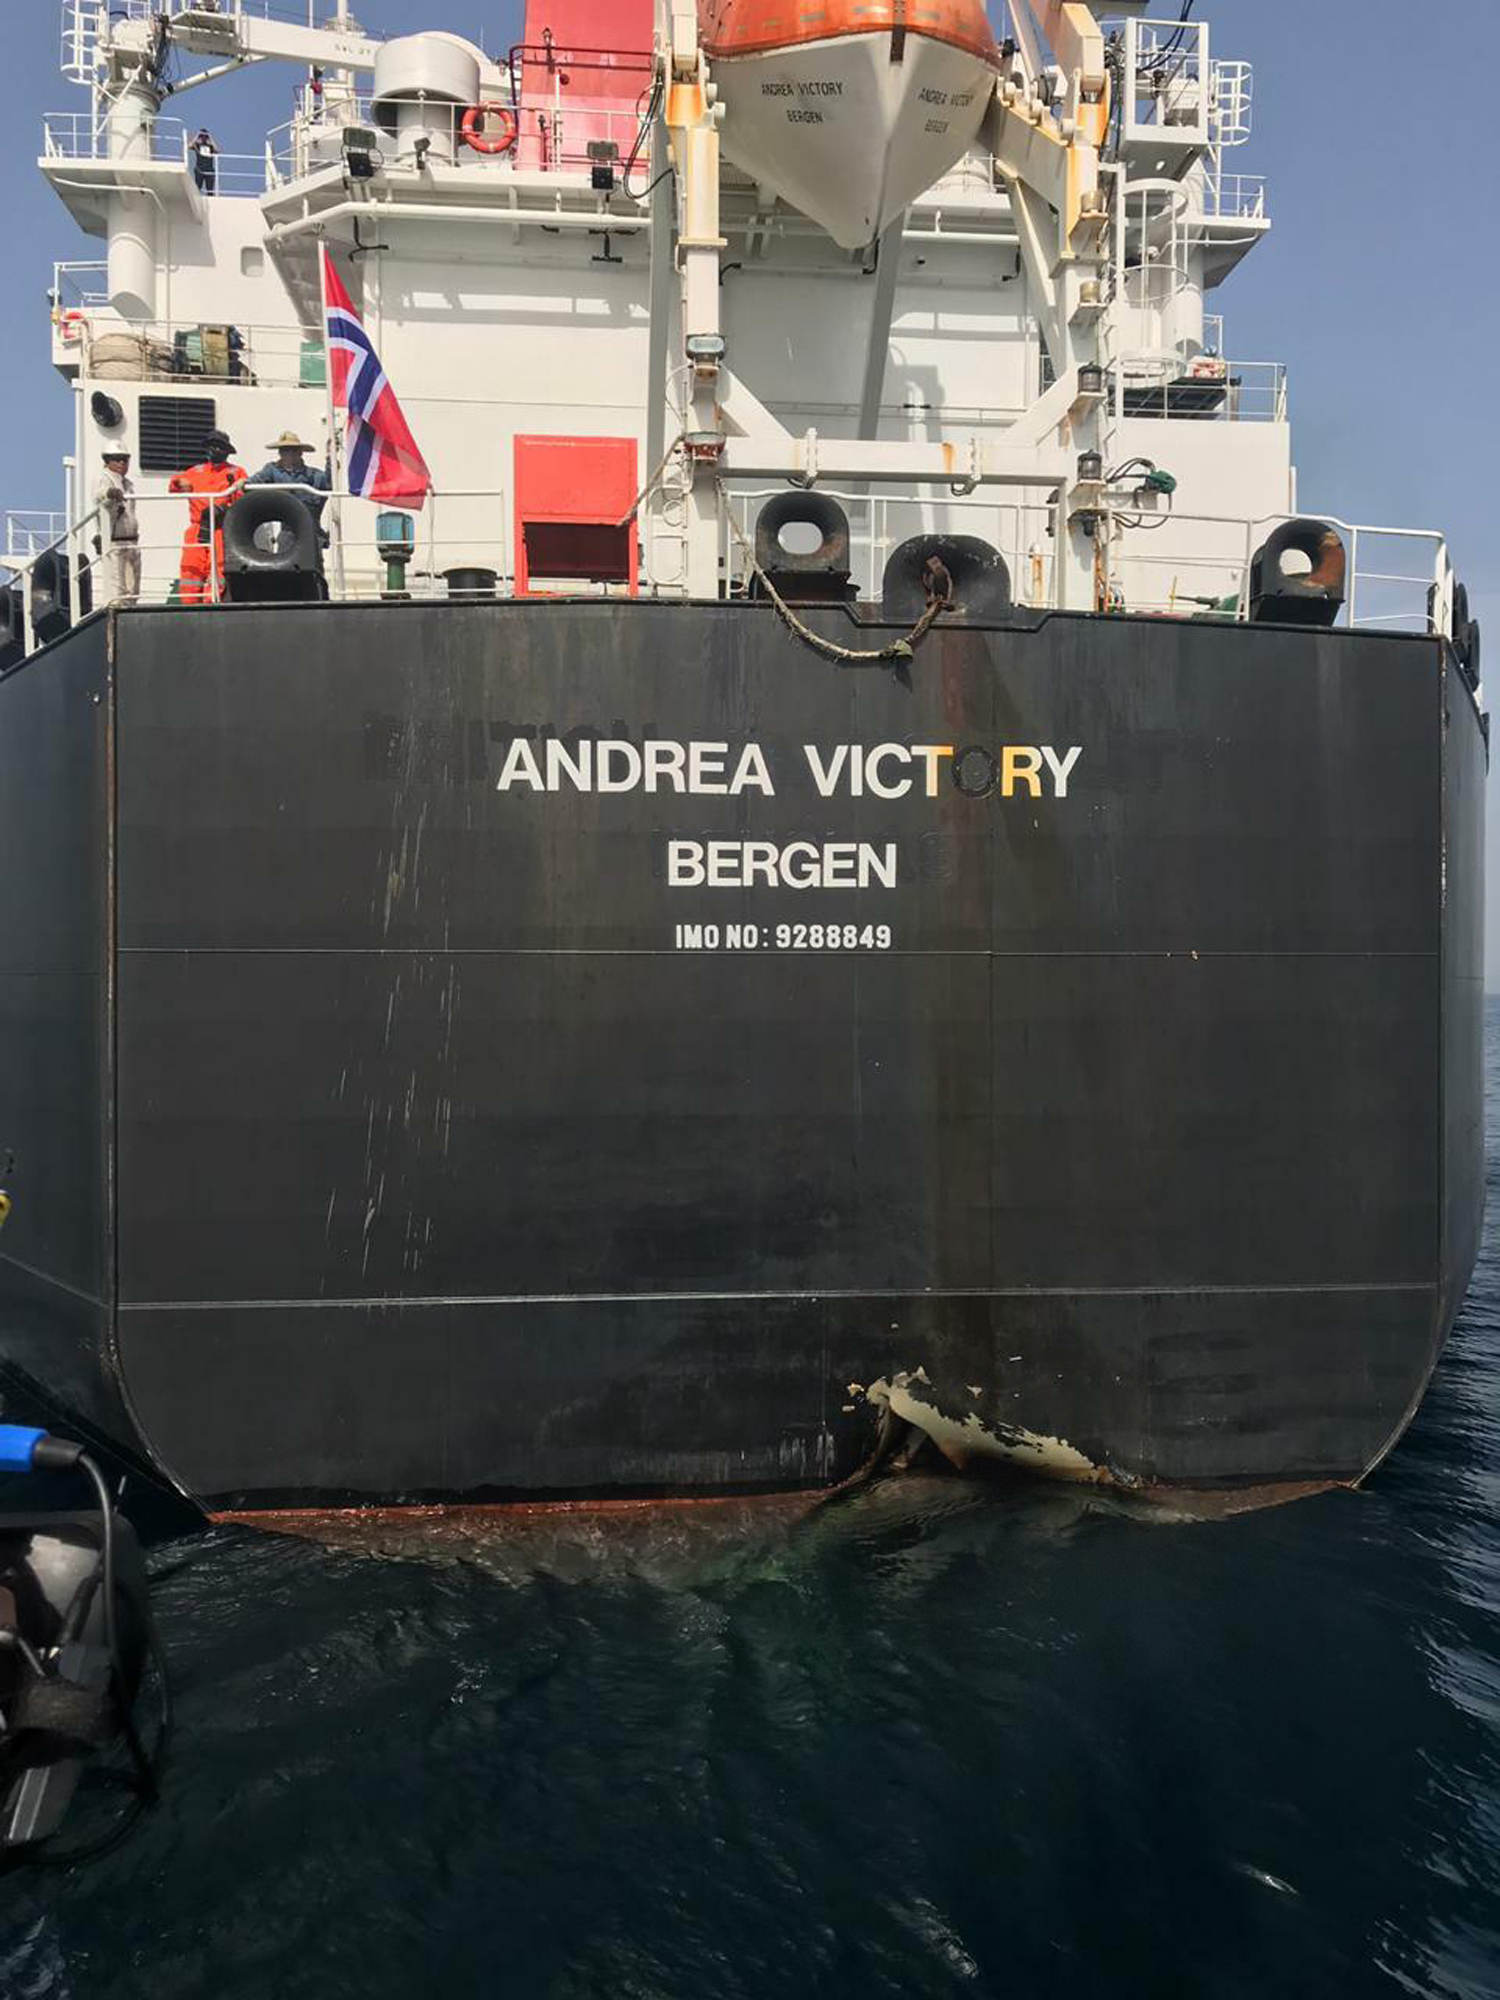 Iran Calls Tanker Sabotage Off UAE A "False Flag", Says It Expected Such Actions